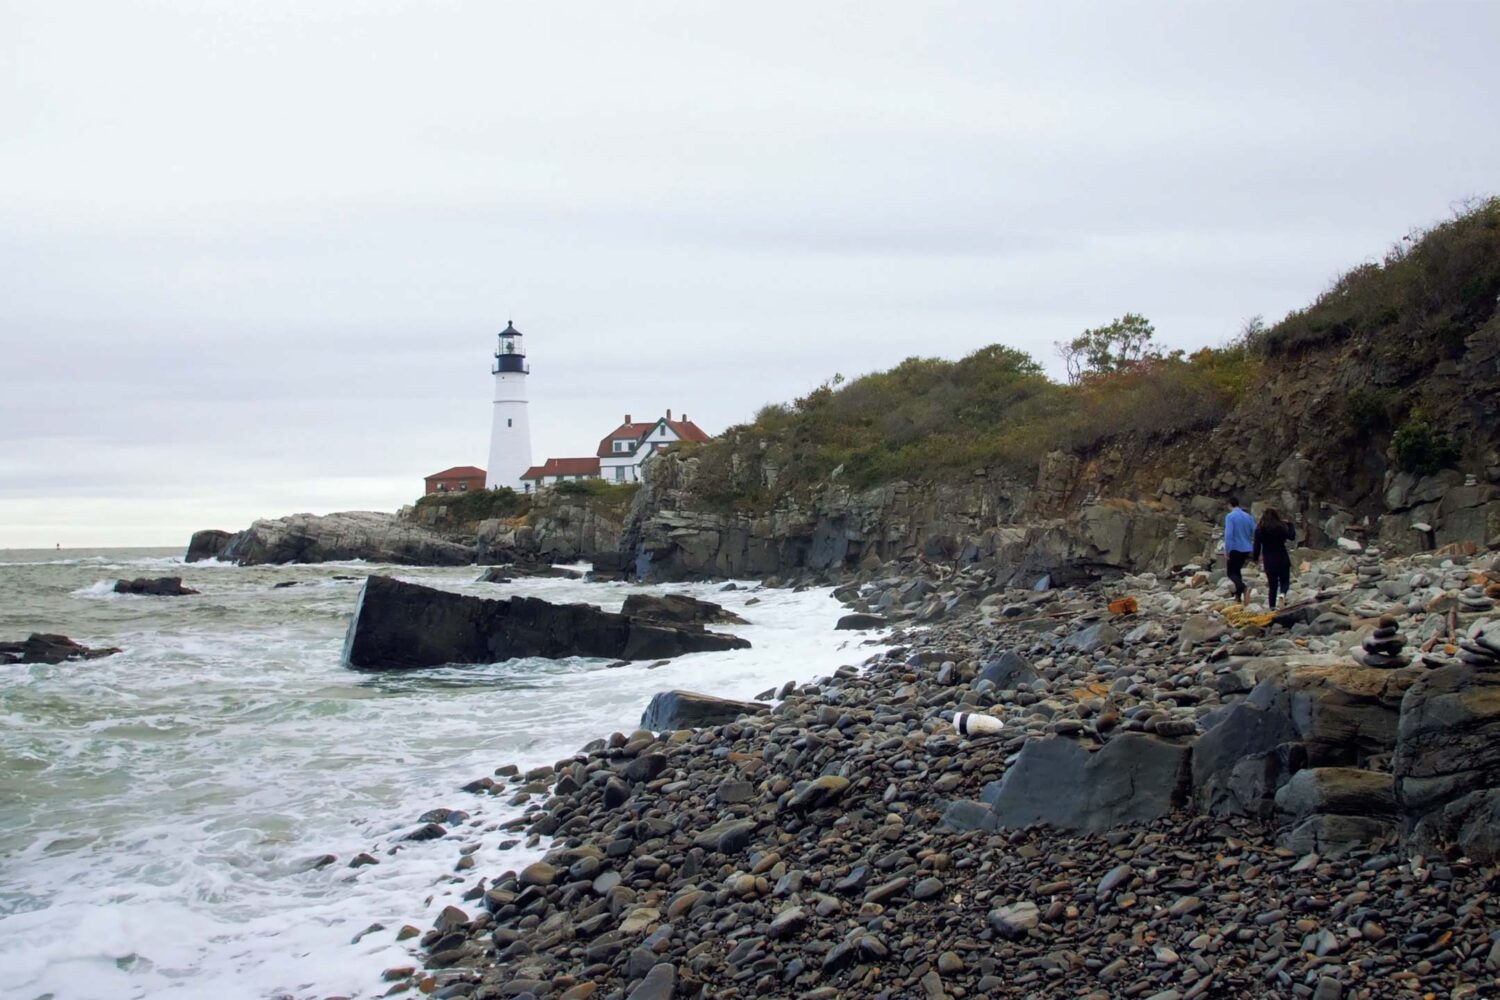 An exploration of Portland, Maine and the surrounding area.